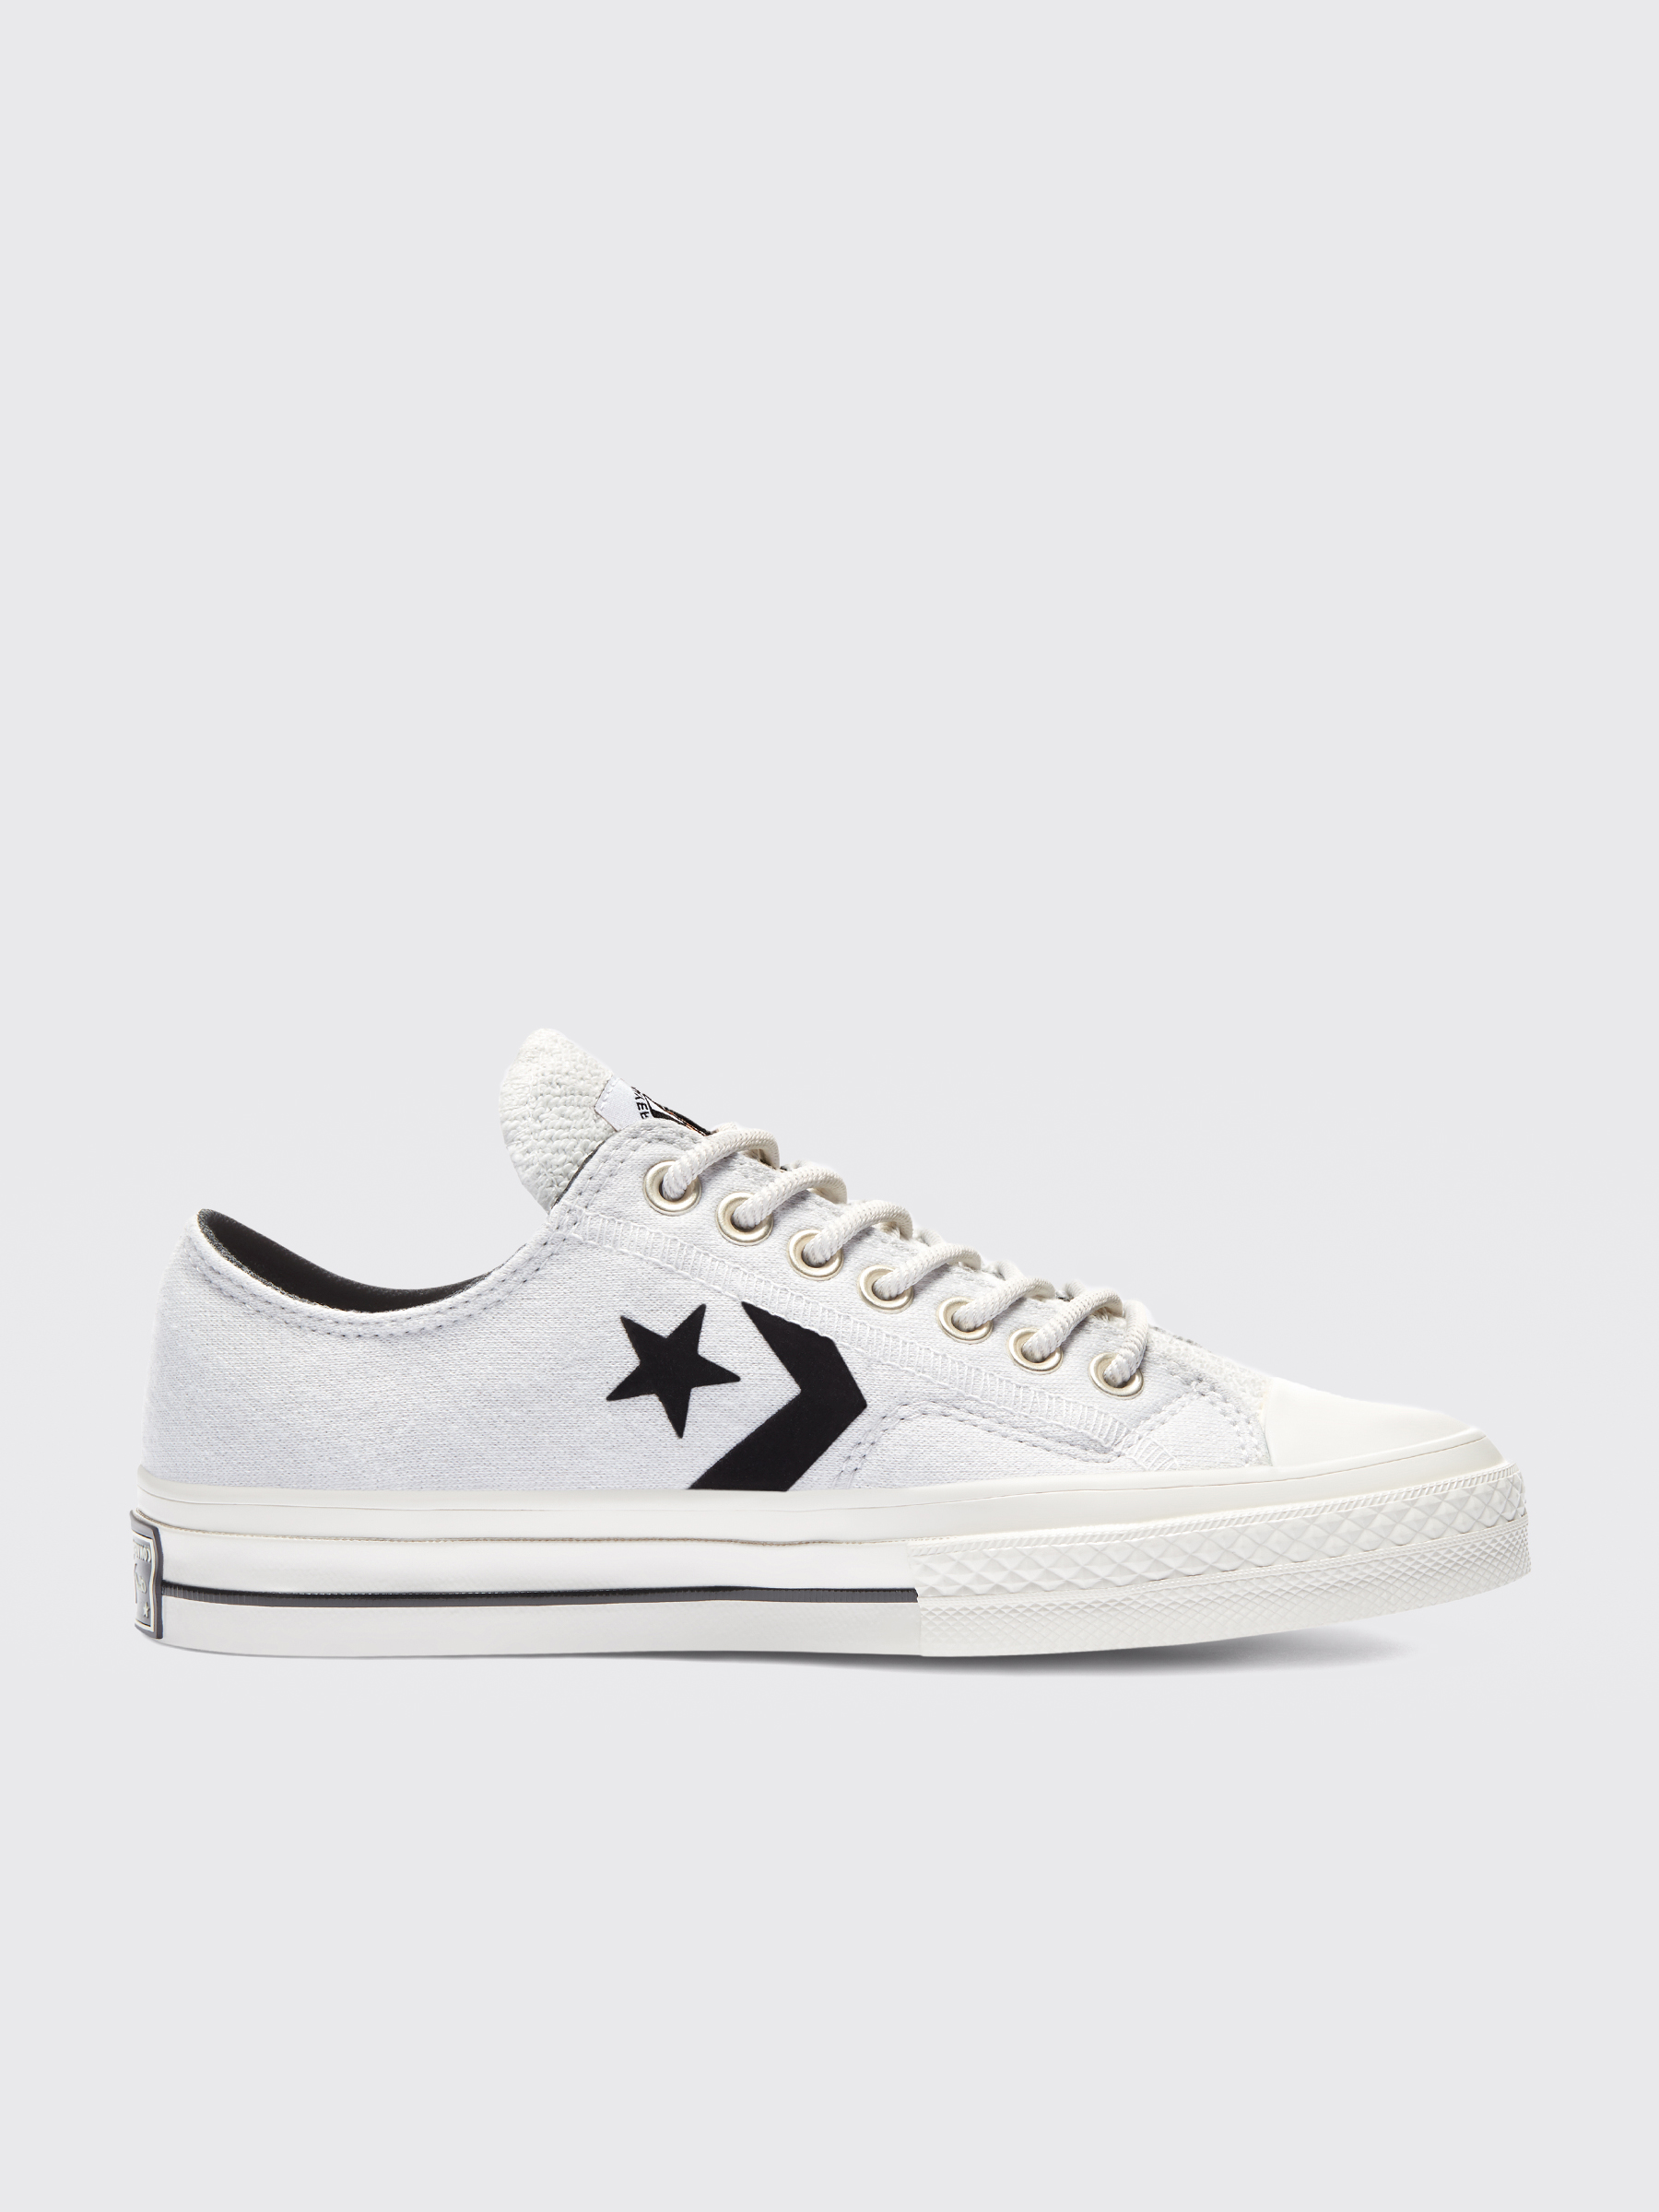 Converse Star Player Reverse Terry OX White